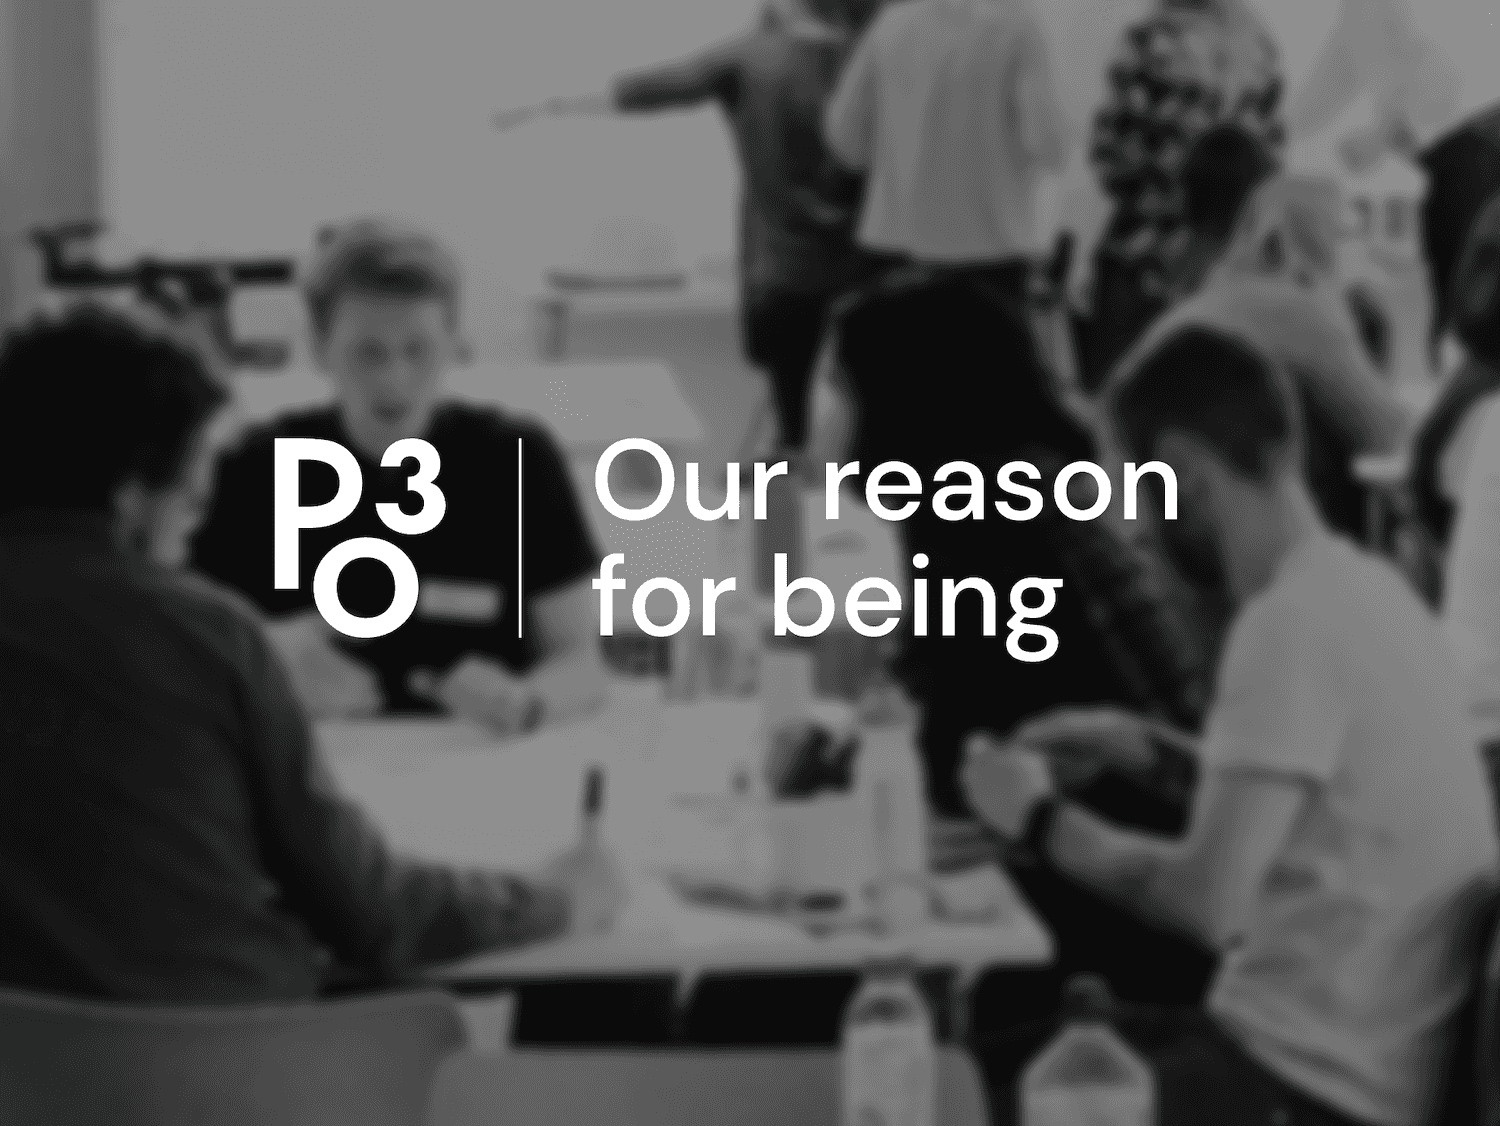 Po3 our reason for being 